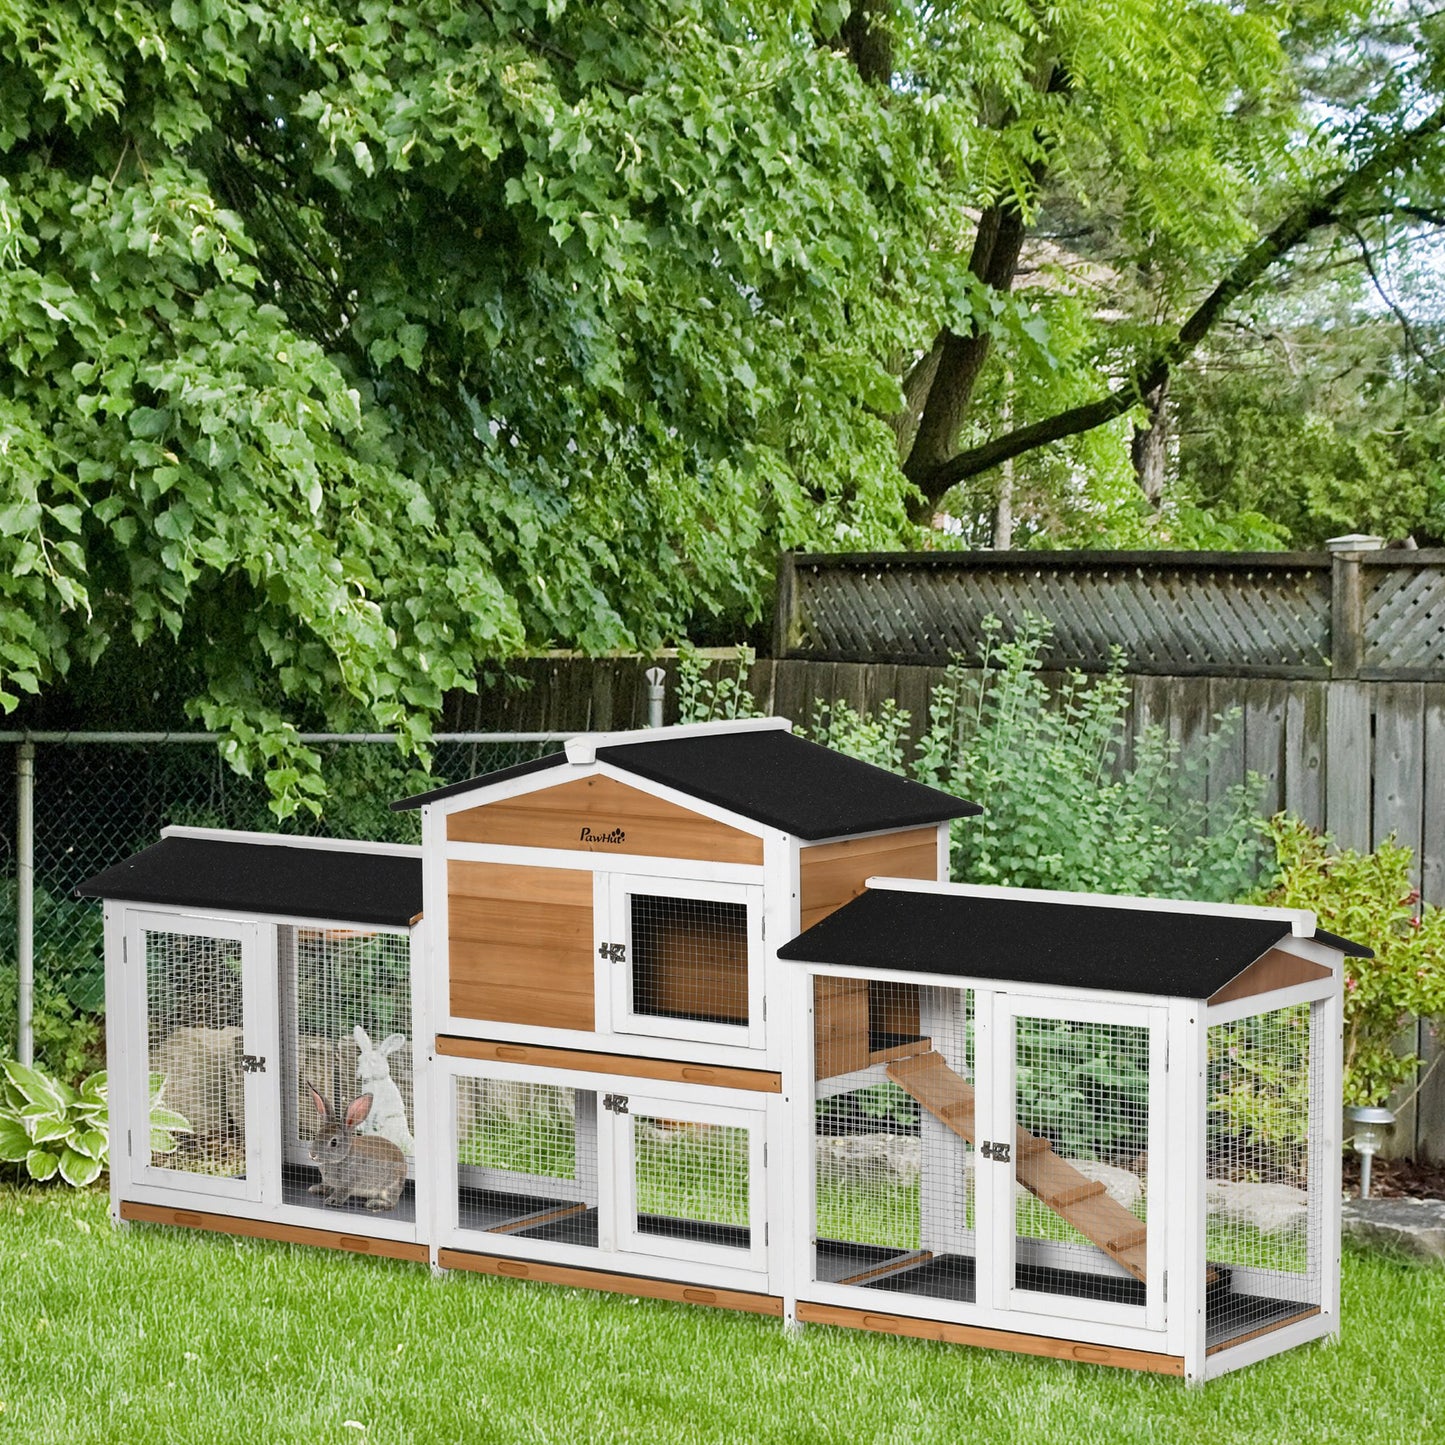 PawHut 2 Tier Wooden Rabbit Hutch, Guinea Pig Cage, Bunny Run, Small Animal House with Double Side Run Boxes, Slide-out Tray, Ramp, 230 x 53 x 93.5cm